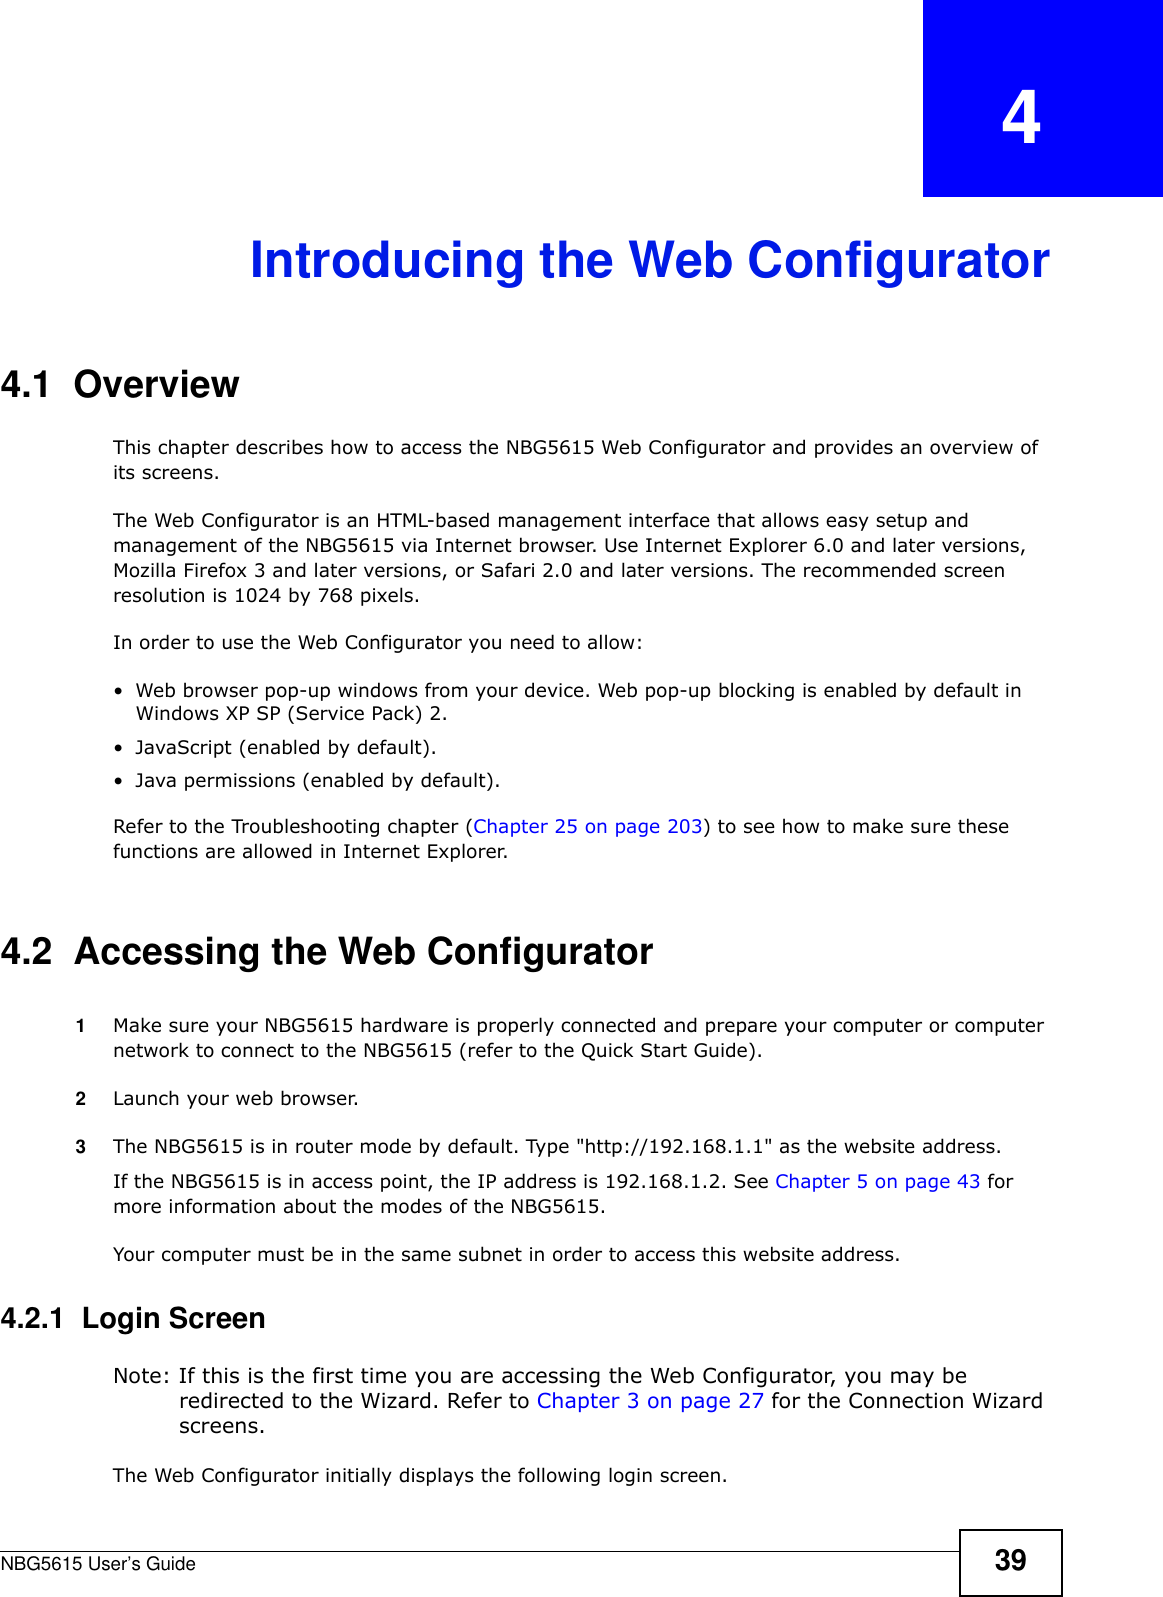 NBG5615 User’s Guide 39CHAPTER   4Introducing the Web Configurator4.1  OverviewThis chapter describes how to access the NBG5615 Web Configurator and provides an overview of its screens.The Web Configurator is an HTML-based management interface that allows easy setup and management of the NBG5615 via Internet browser. Use Internet Explorer 6.0 and later versions, Mozilla Firefox 3 and later versions, or Safari 2.0 and later versions. The recommended screen resolution is 1024 by 768 pixels.In order to use the Web Configurator you need to allow:• Web browser pop-up windows from your device. Web pop-up blocking is enabled by default in Windows XP SP (Service Pack) 2.• JavaScript (enabled by default).• Java permissions (enabled by default).Refer to the Troubleshooting chapter (Chapter 25 on page 203) to see how to make sure these functions are allowed in Internet Explorer.4.2  Accessing the Web Configurator1Make sure your NBG5615 hardware is properly connected and prepare your computer or computer network to connect to the NBG5615 (refer to the Quick Start Guide).2Launch your web browser.3The NBG5615 is in router mode by default. Type &quot;http://192.168.1.1&quot; as the website address.If the NBG5615 is in access point, the IP address is 192.168.1.2. See Chapter 5 on page 43 for more information about the modes of the NBG5615.Your computer must be in the same subnet in order to access this website address.4.2.1  Login ScreenNote: If this is the first time you are accessing the Web Configurator, you may be redirected to the Wizard. Refer to Chapter 3 on page 27 for the Connection Wizard screens. The Web Configurator initially displays the following login screen.